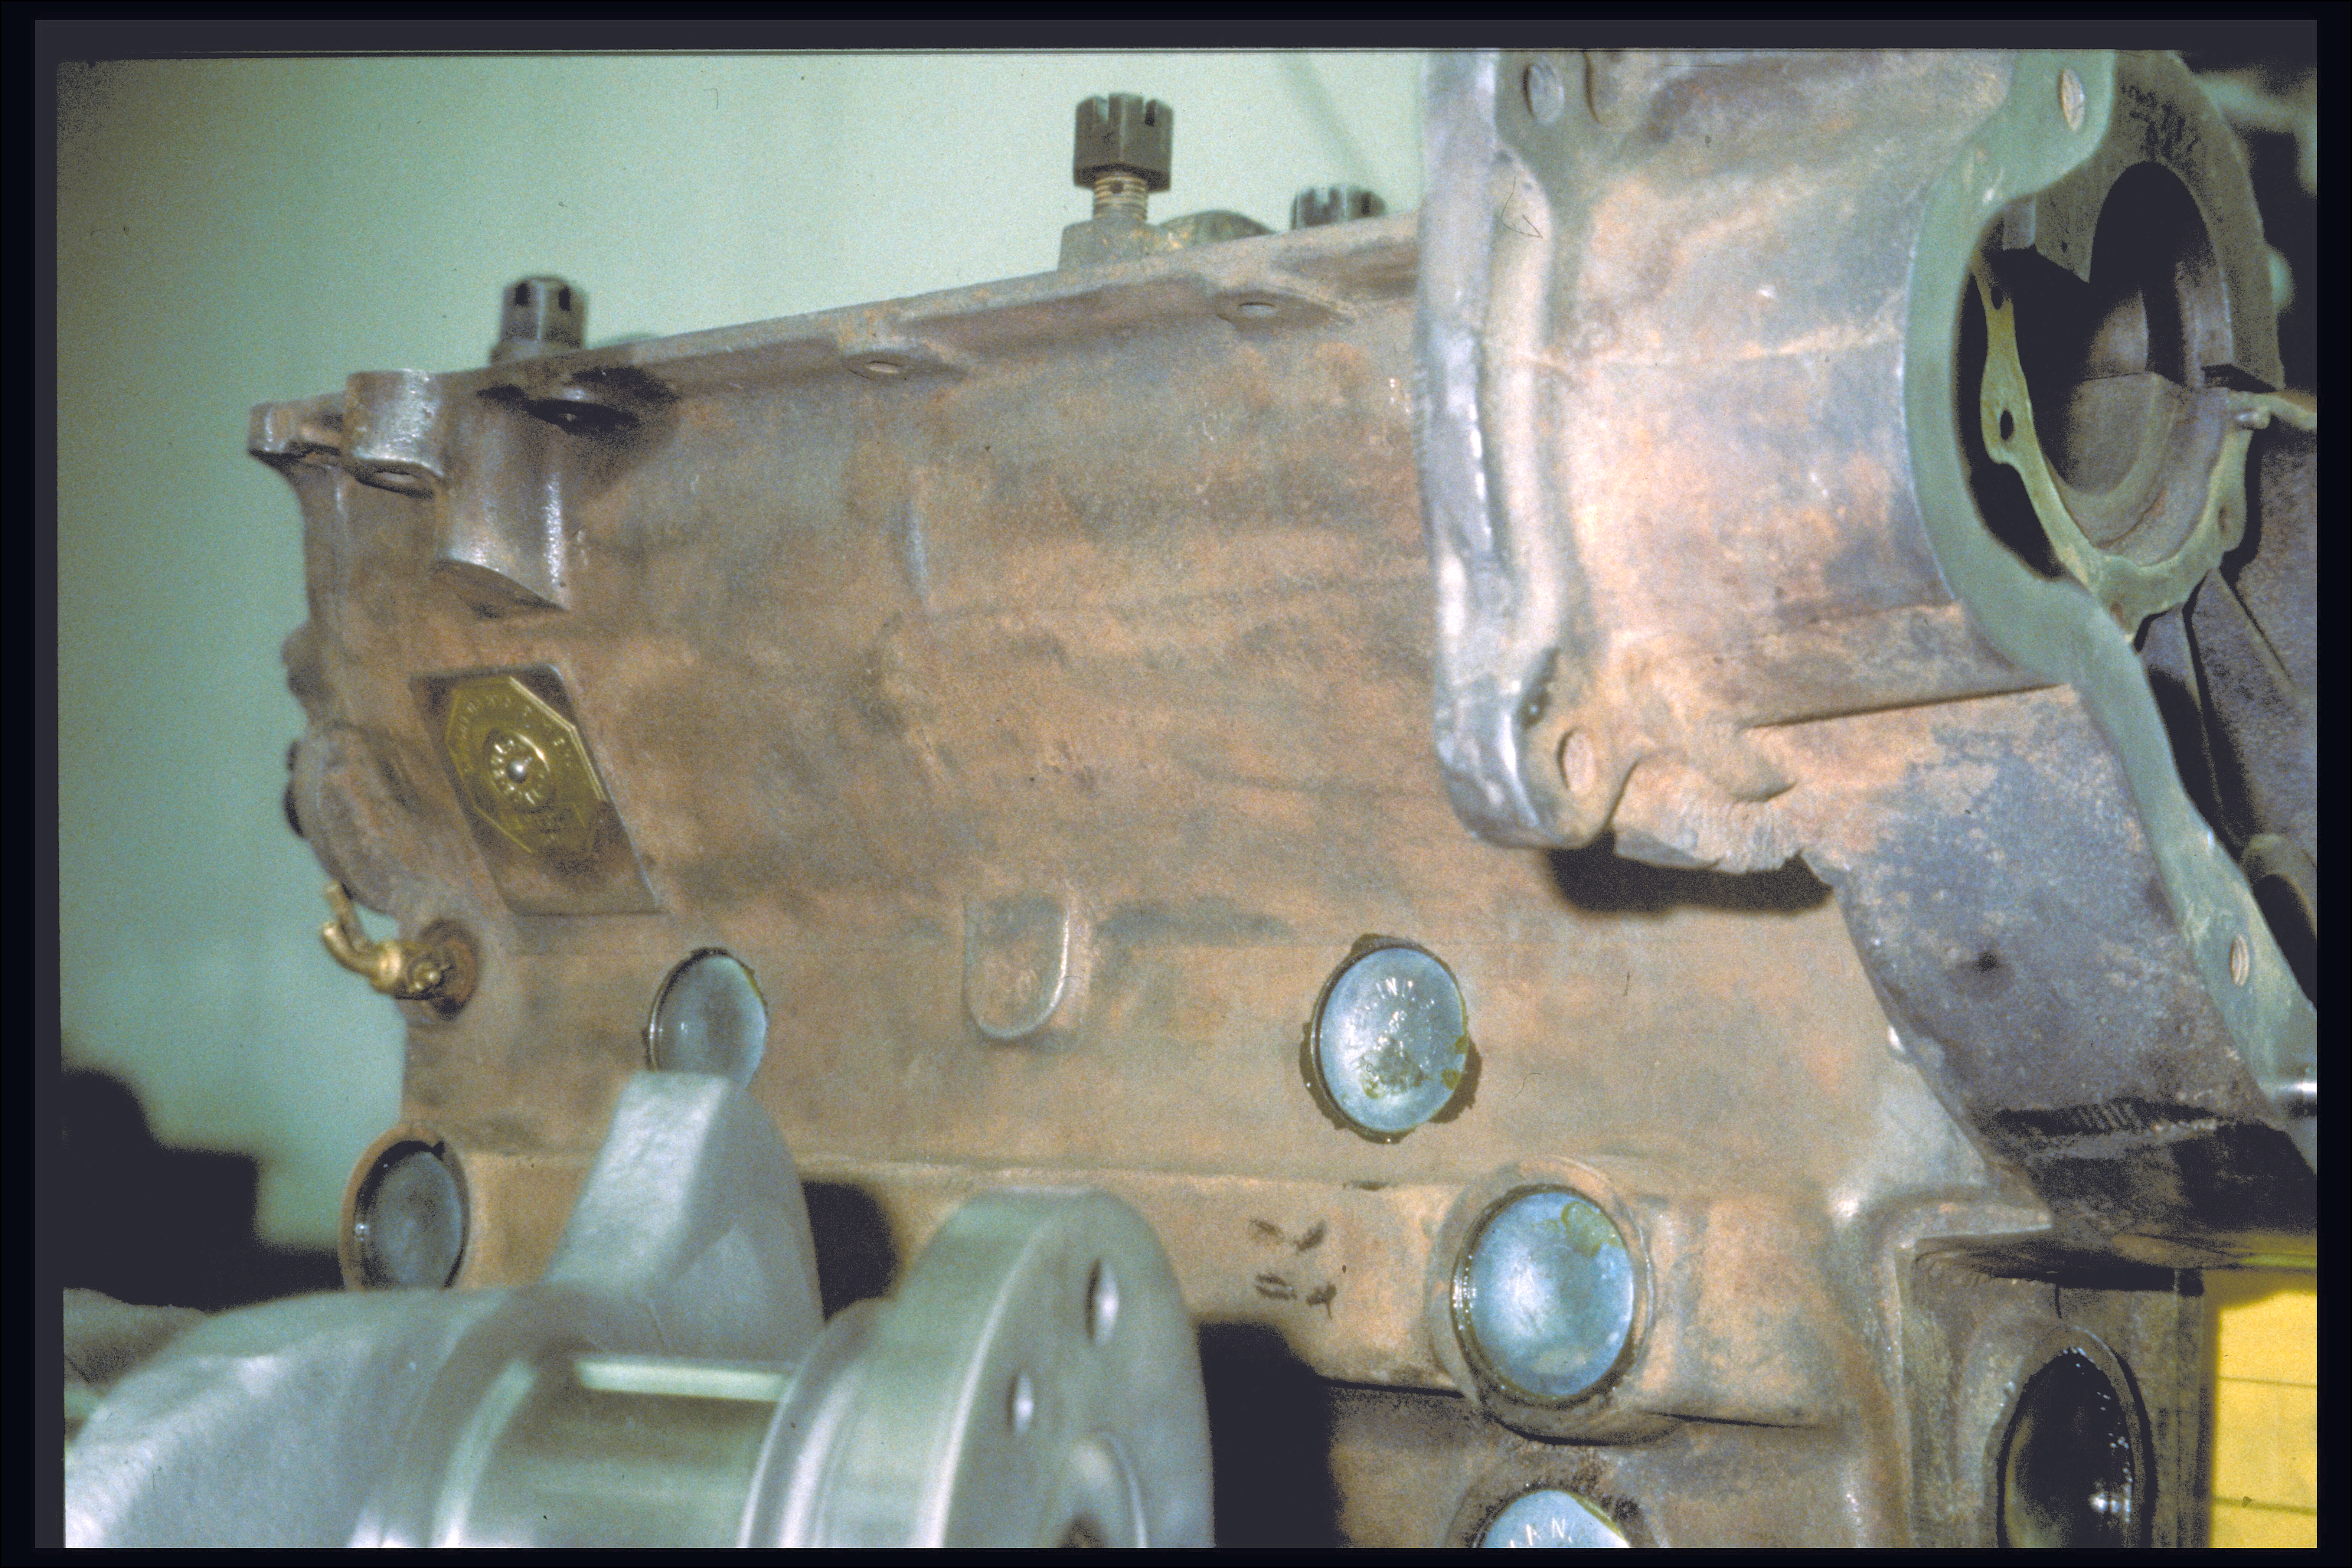 Inverted engine block, right side